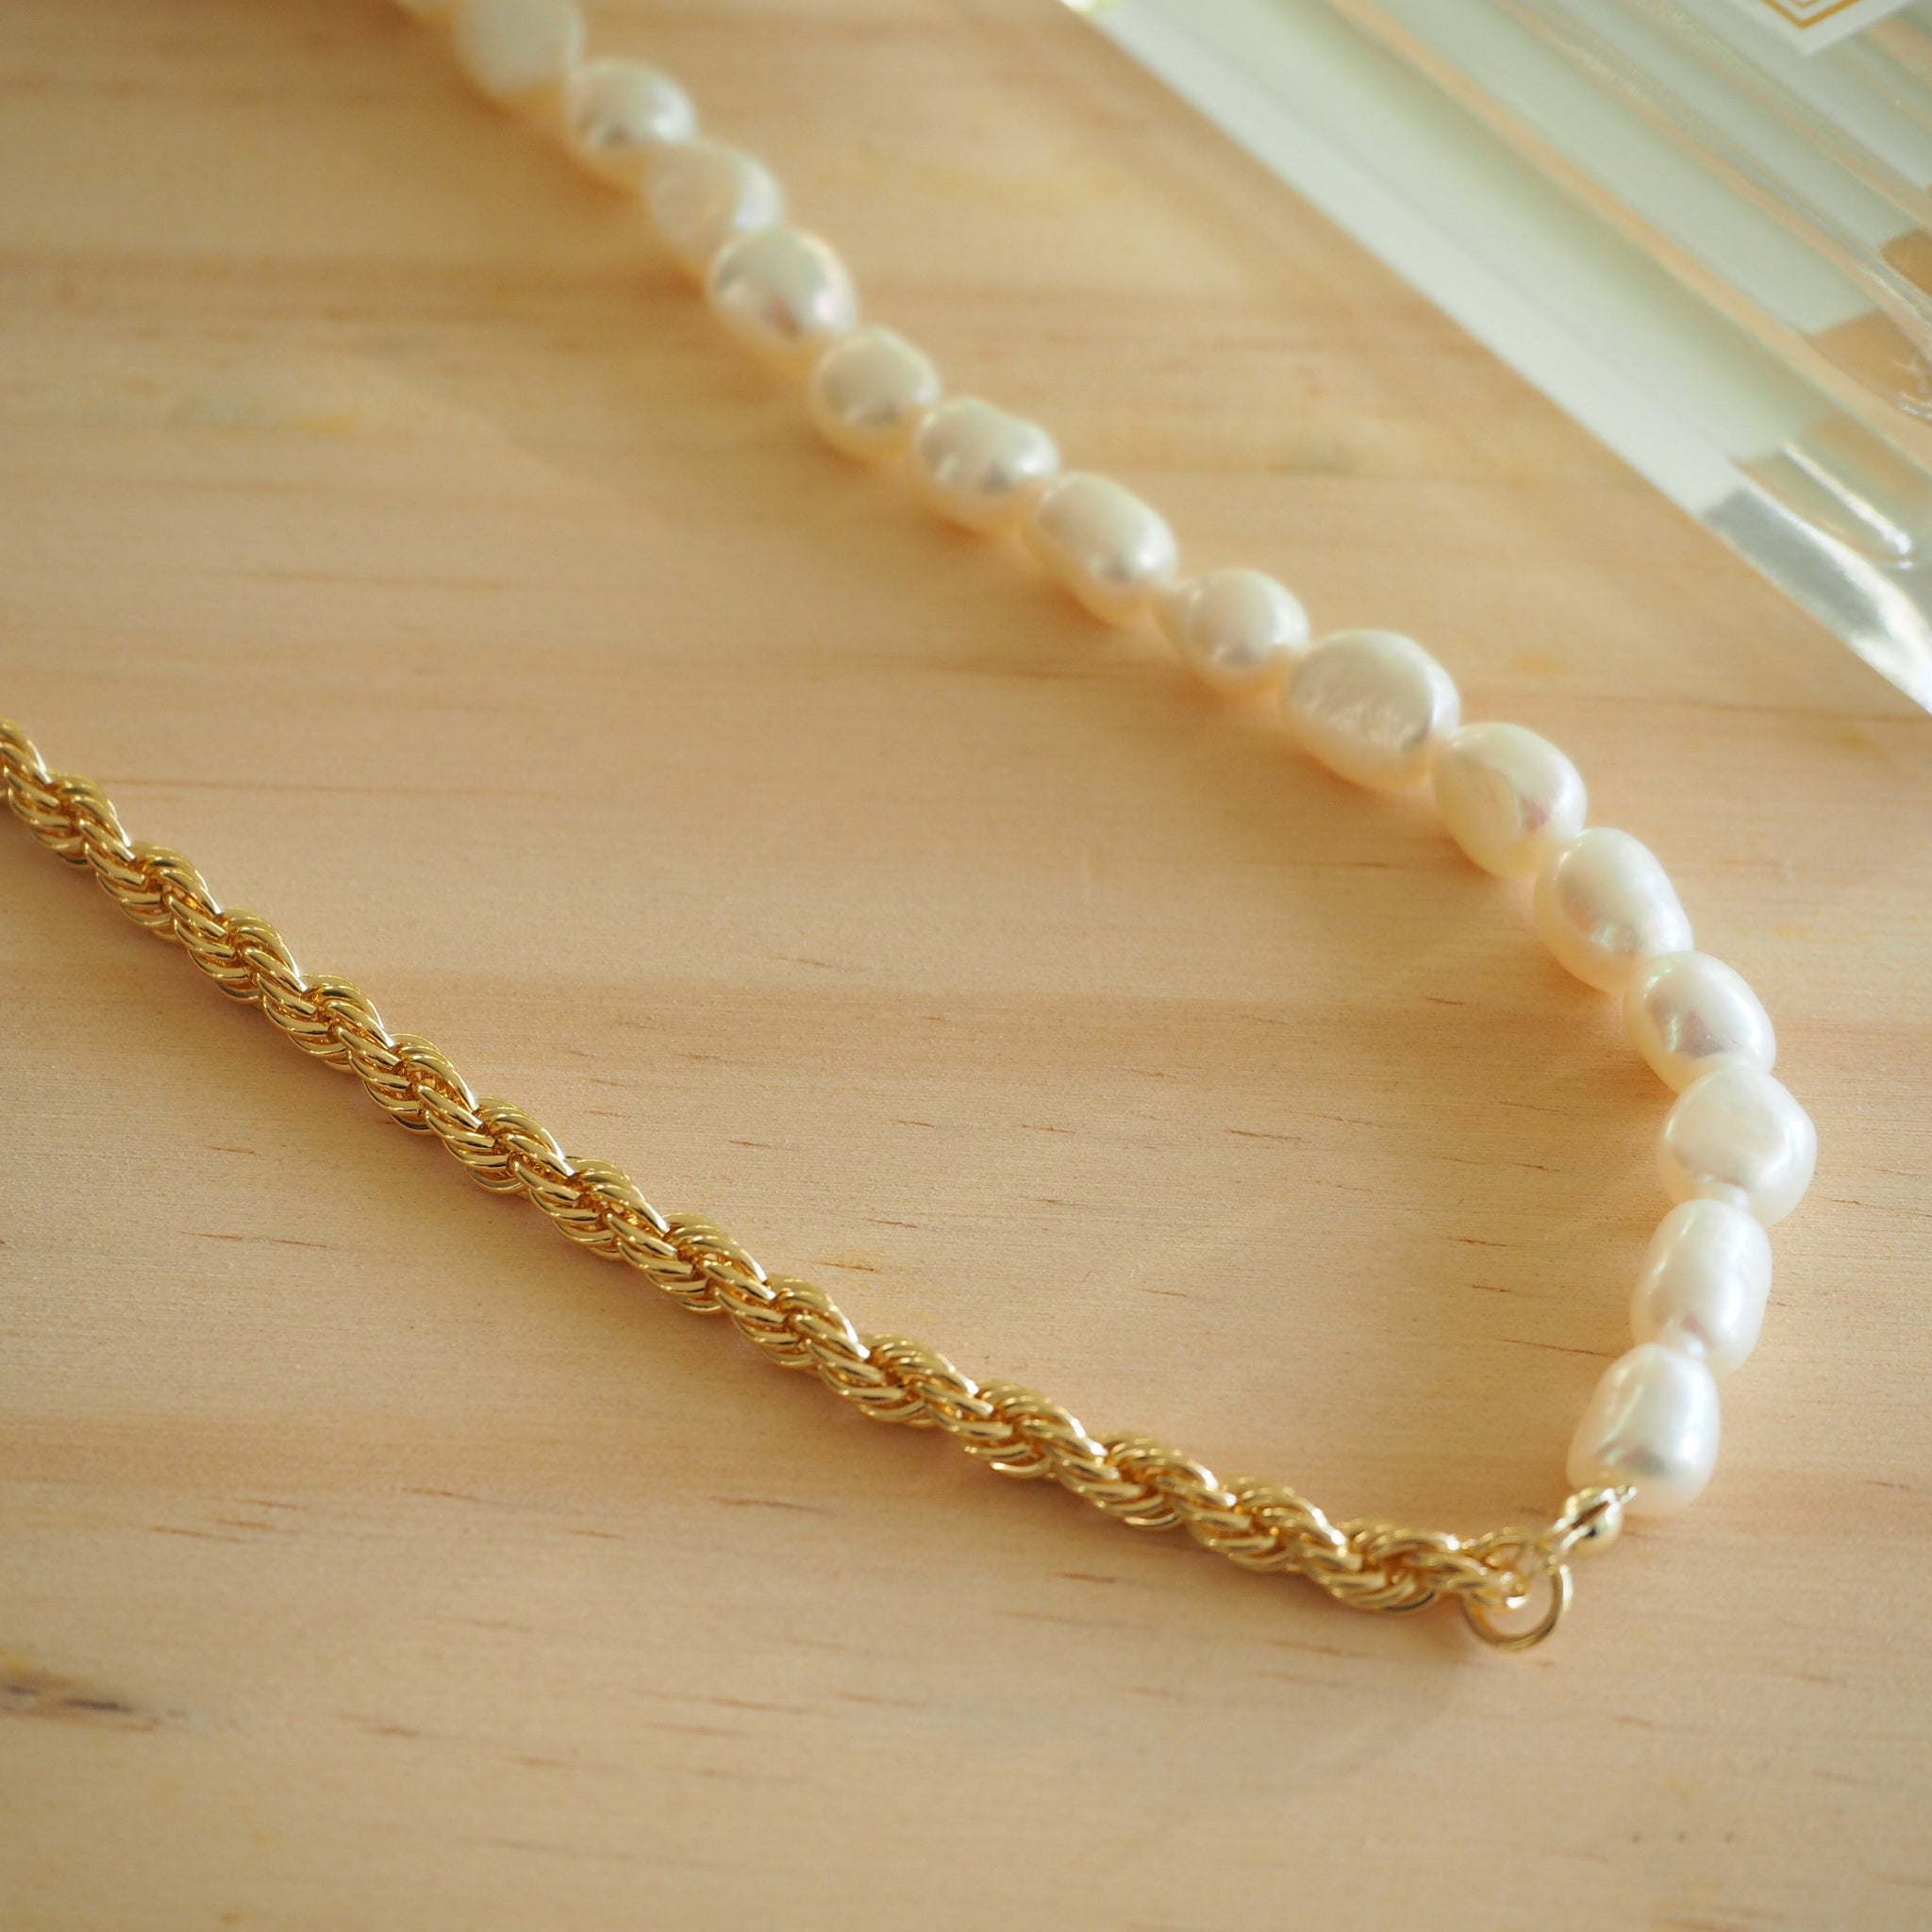 Best Gold & Pearl Chain Necklace Jewelry Gift | Best Aesthetic Yellow Gold  Pearl Necklace Jewelry Gift for Women, Girls, Girlfriend, Mother, Wife -  Mason & Madison Co.